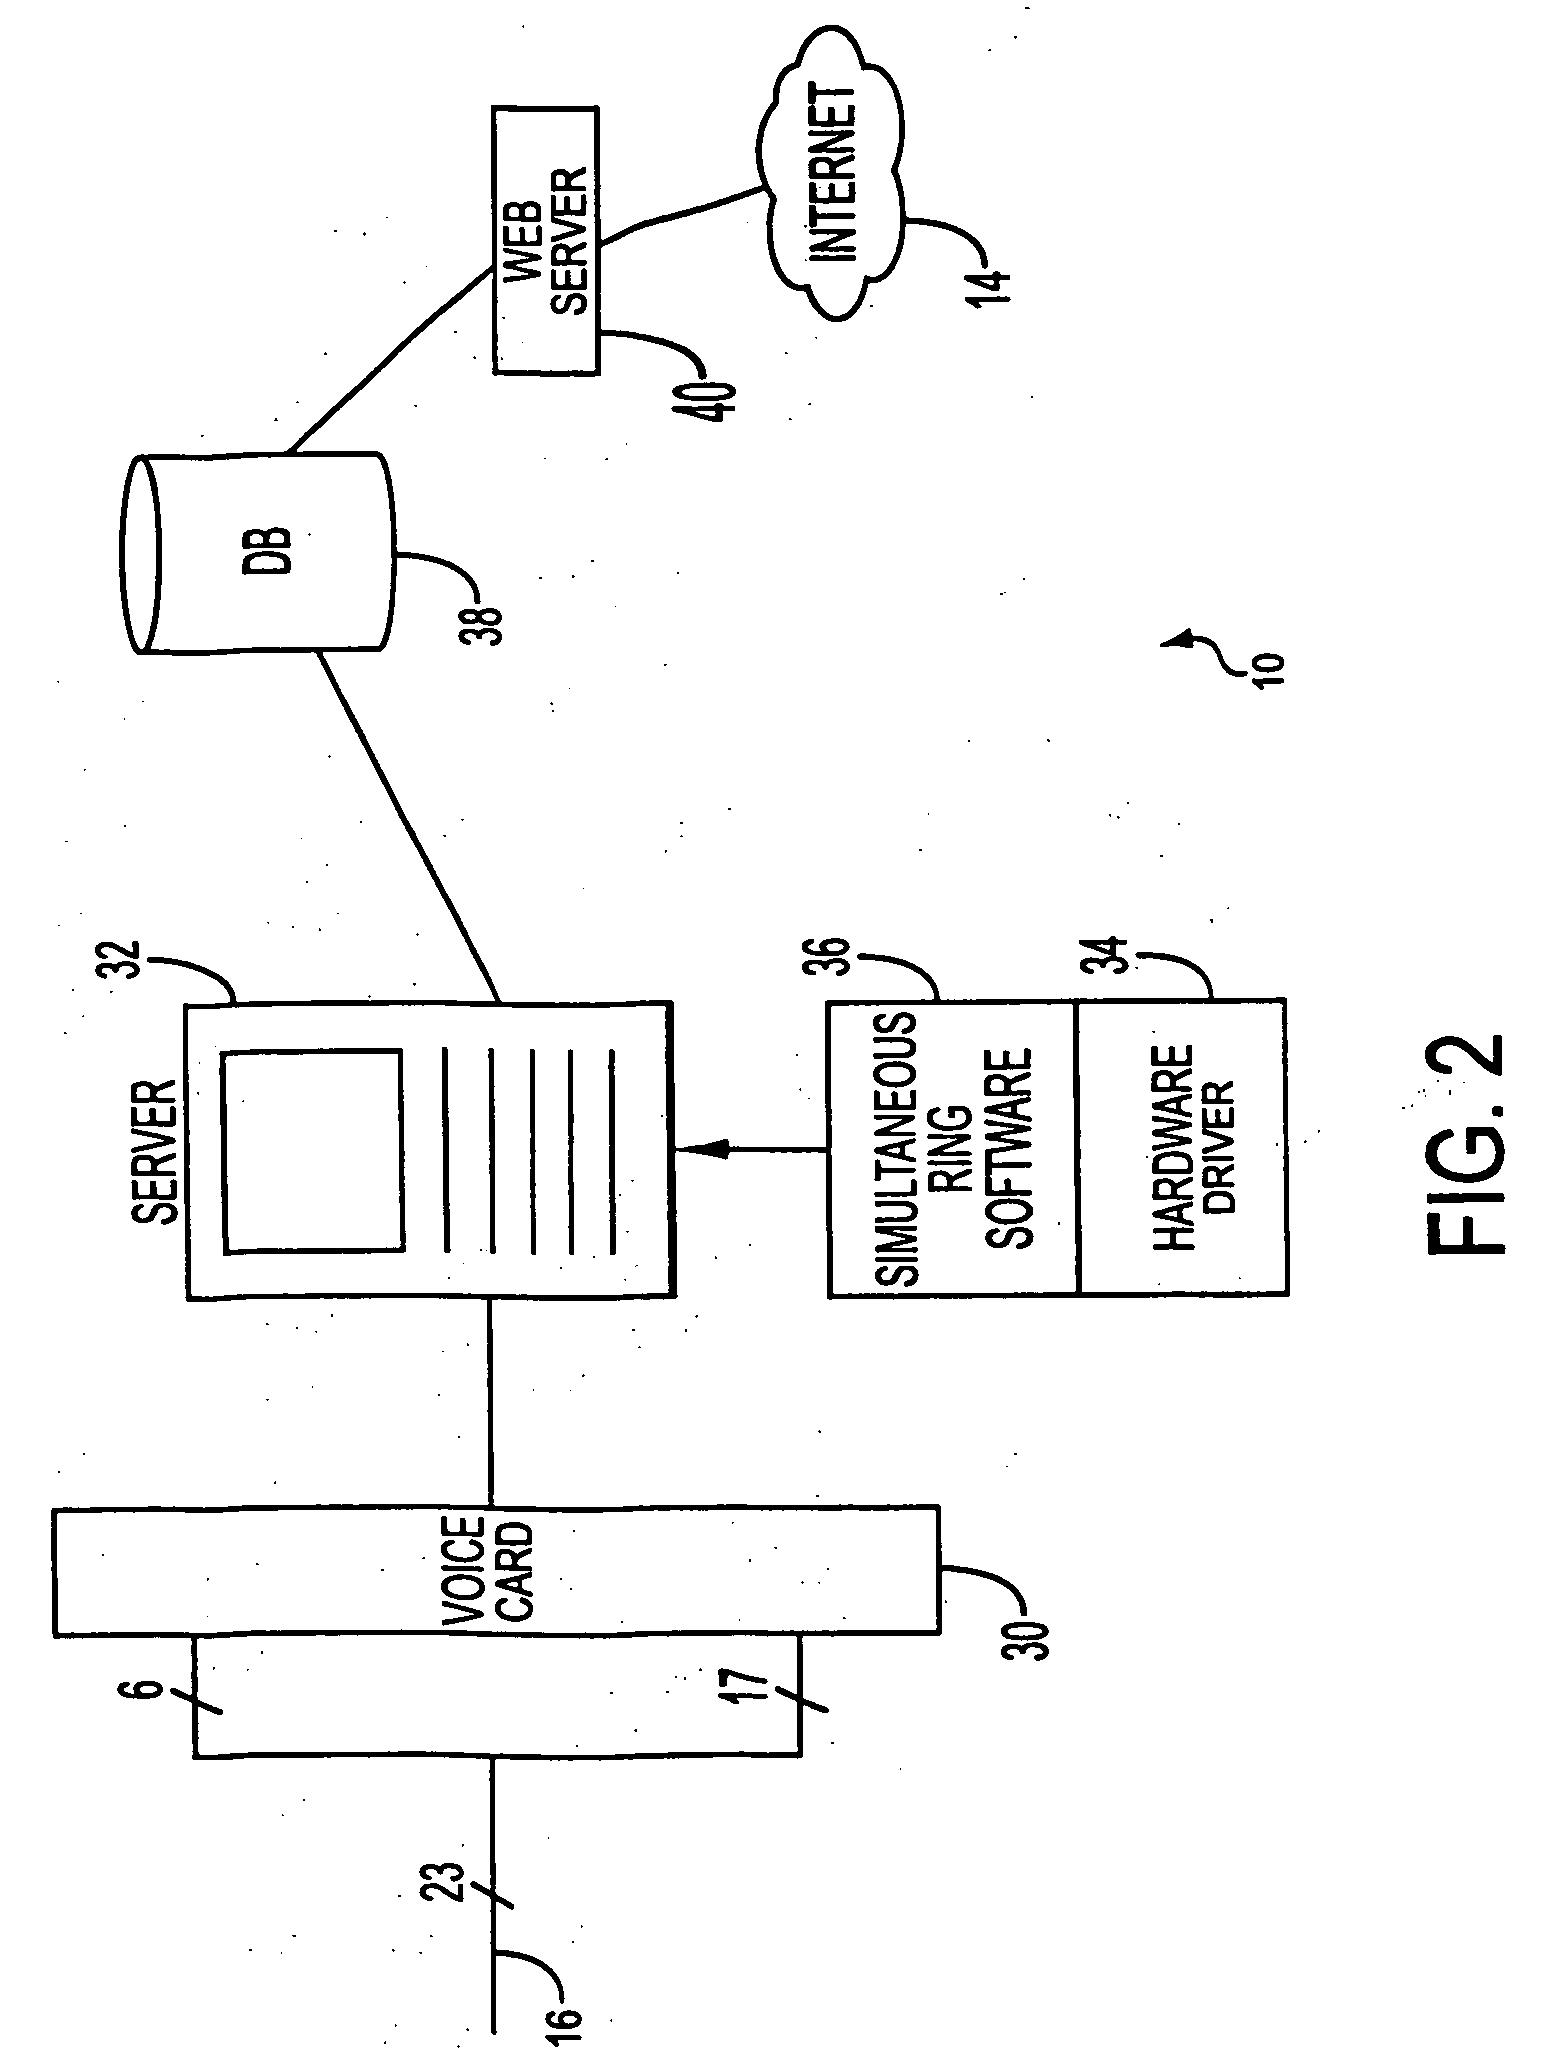 Simultaneous telephone ring apparatus and method